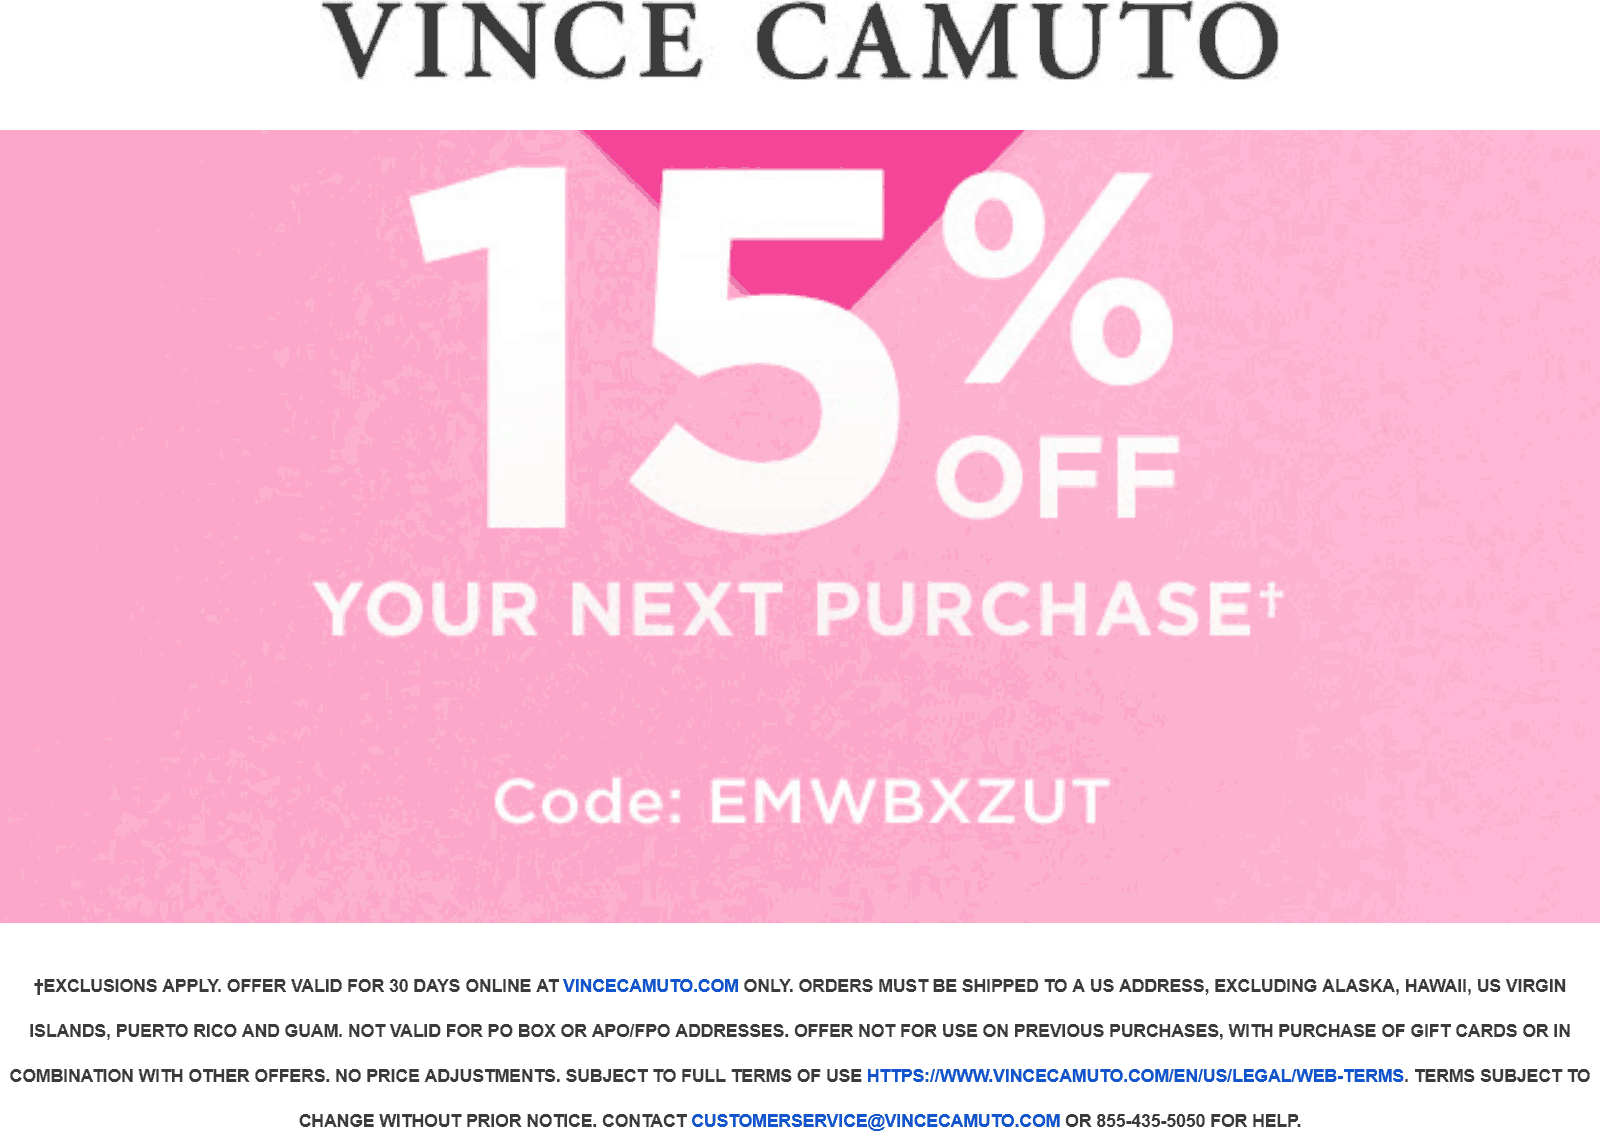 Vince Camuto stores Coupon  15% off online at Vince Camuto via promo code EMWBXZUT #vincecamuto 